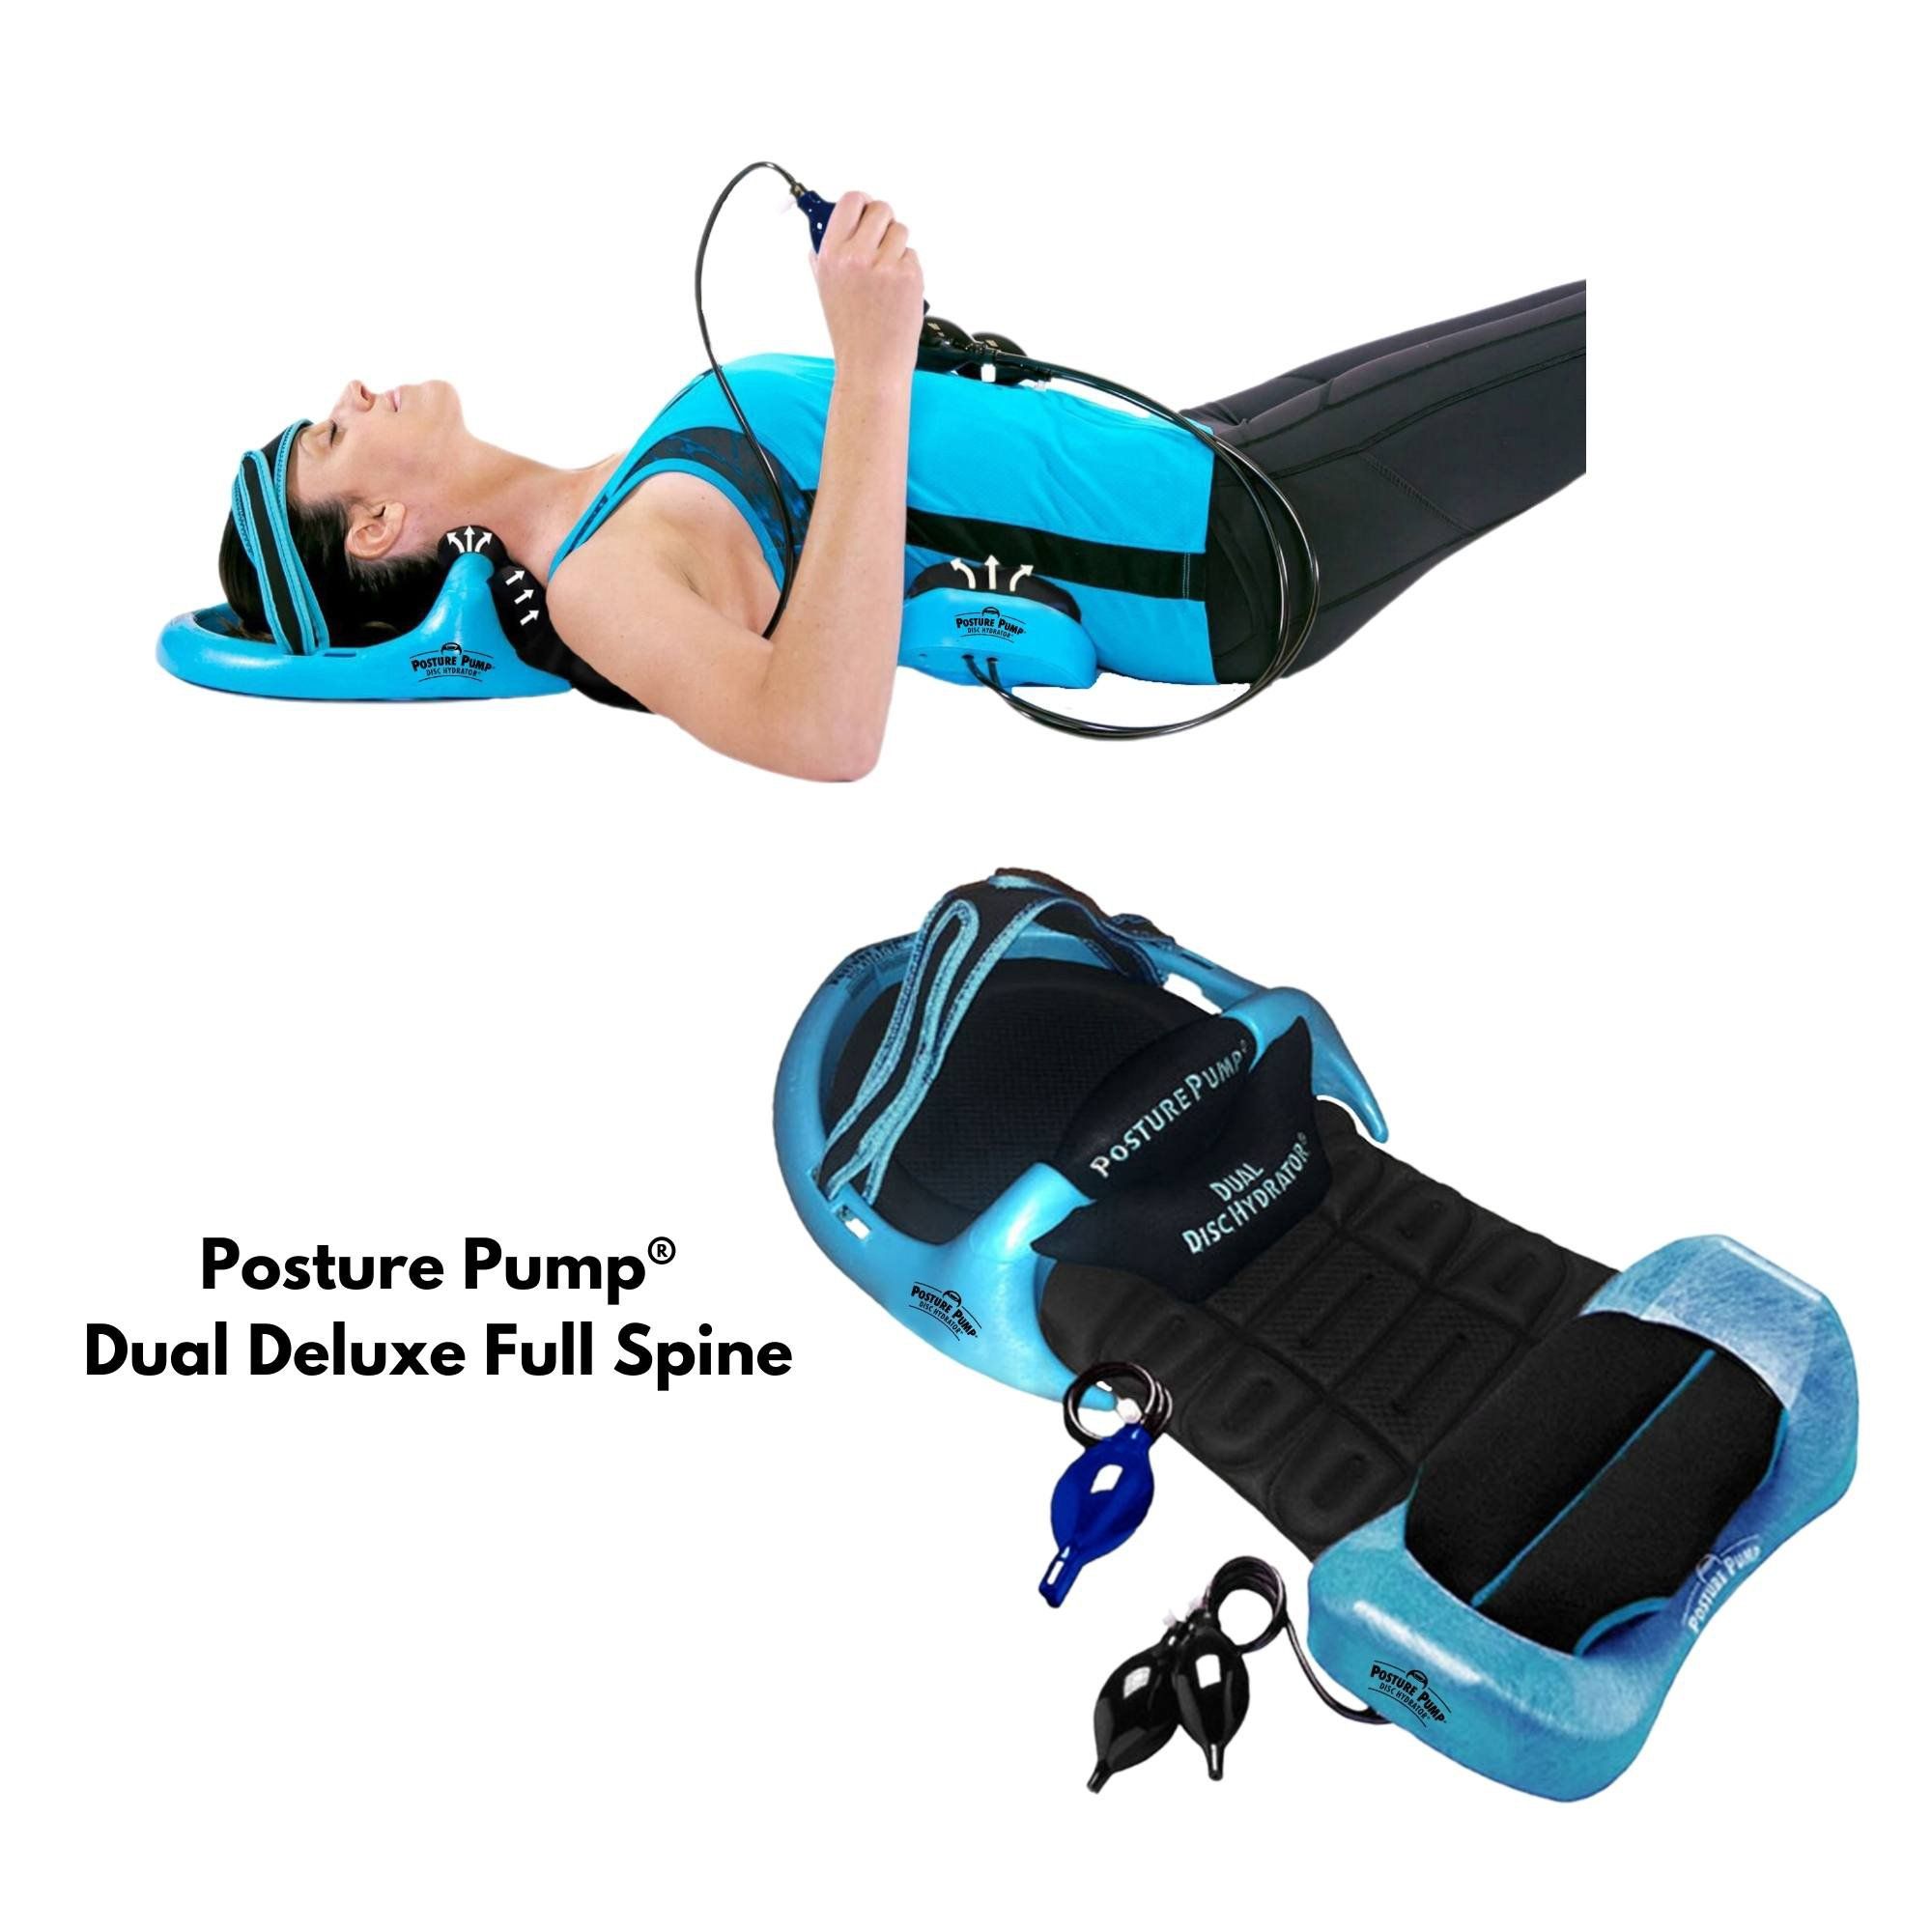 Posture Pump® Dual Deluxe Full Spine (Model 4100-D) - One Size Fits Most